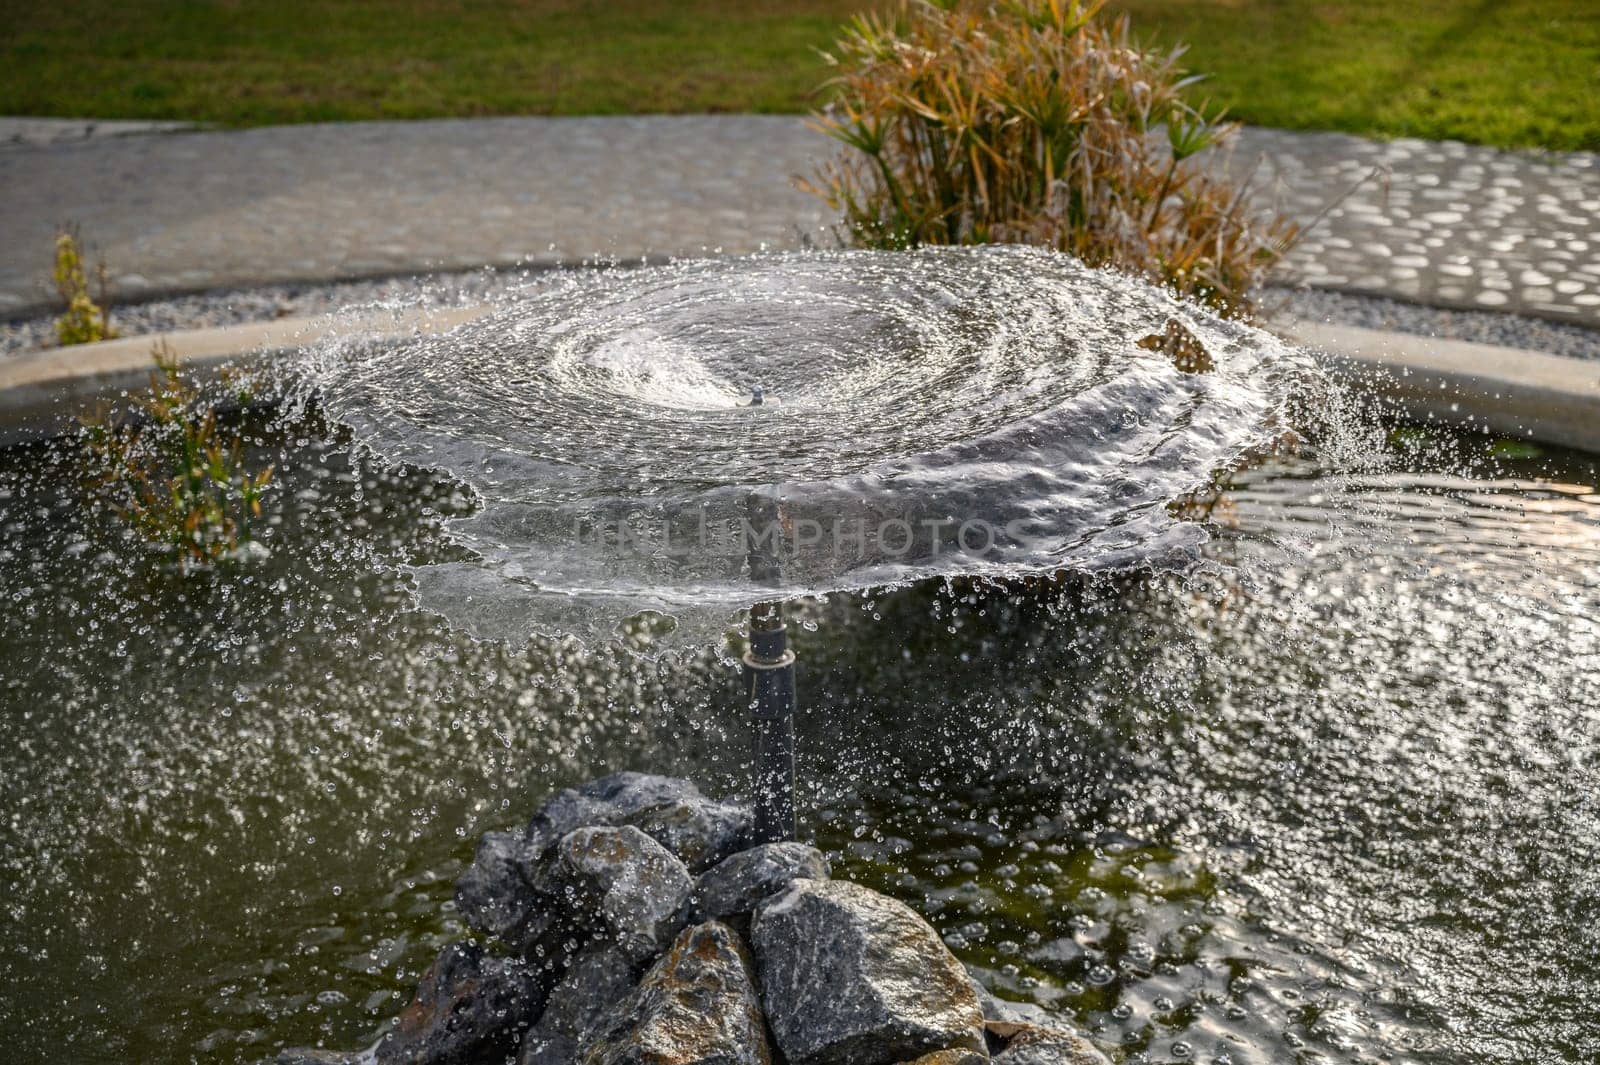 circle of water from a fountain spraying water 3 by Mixa74